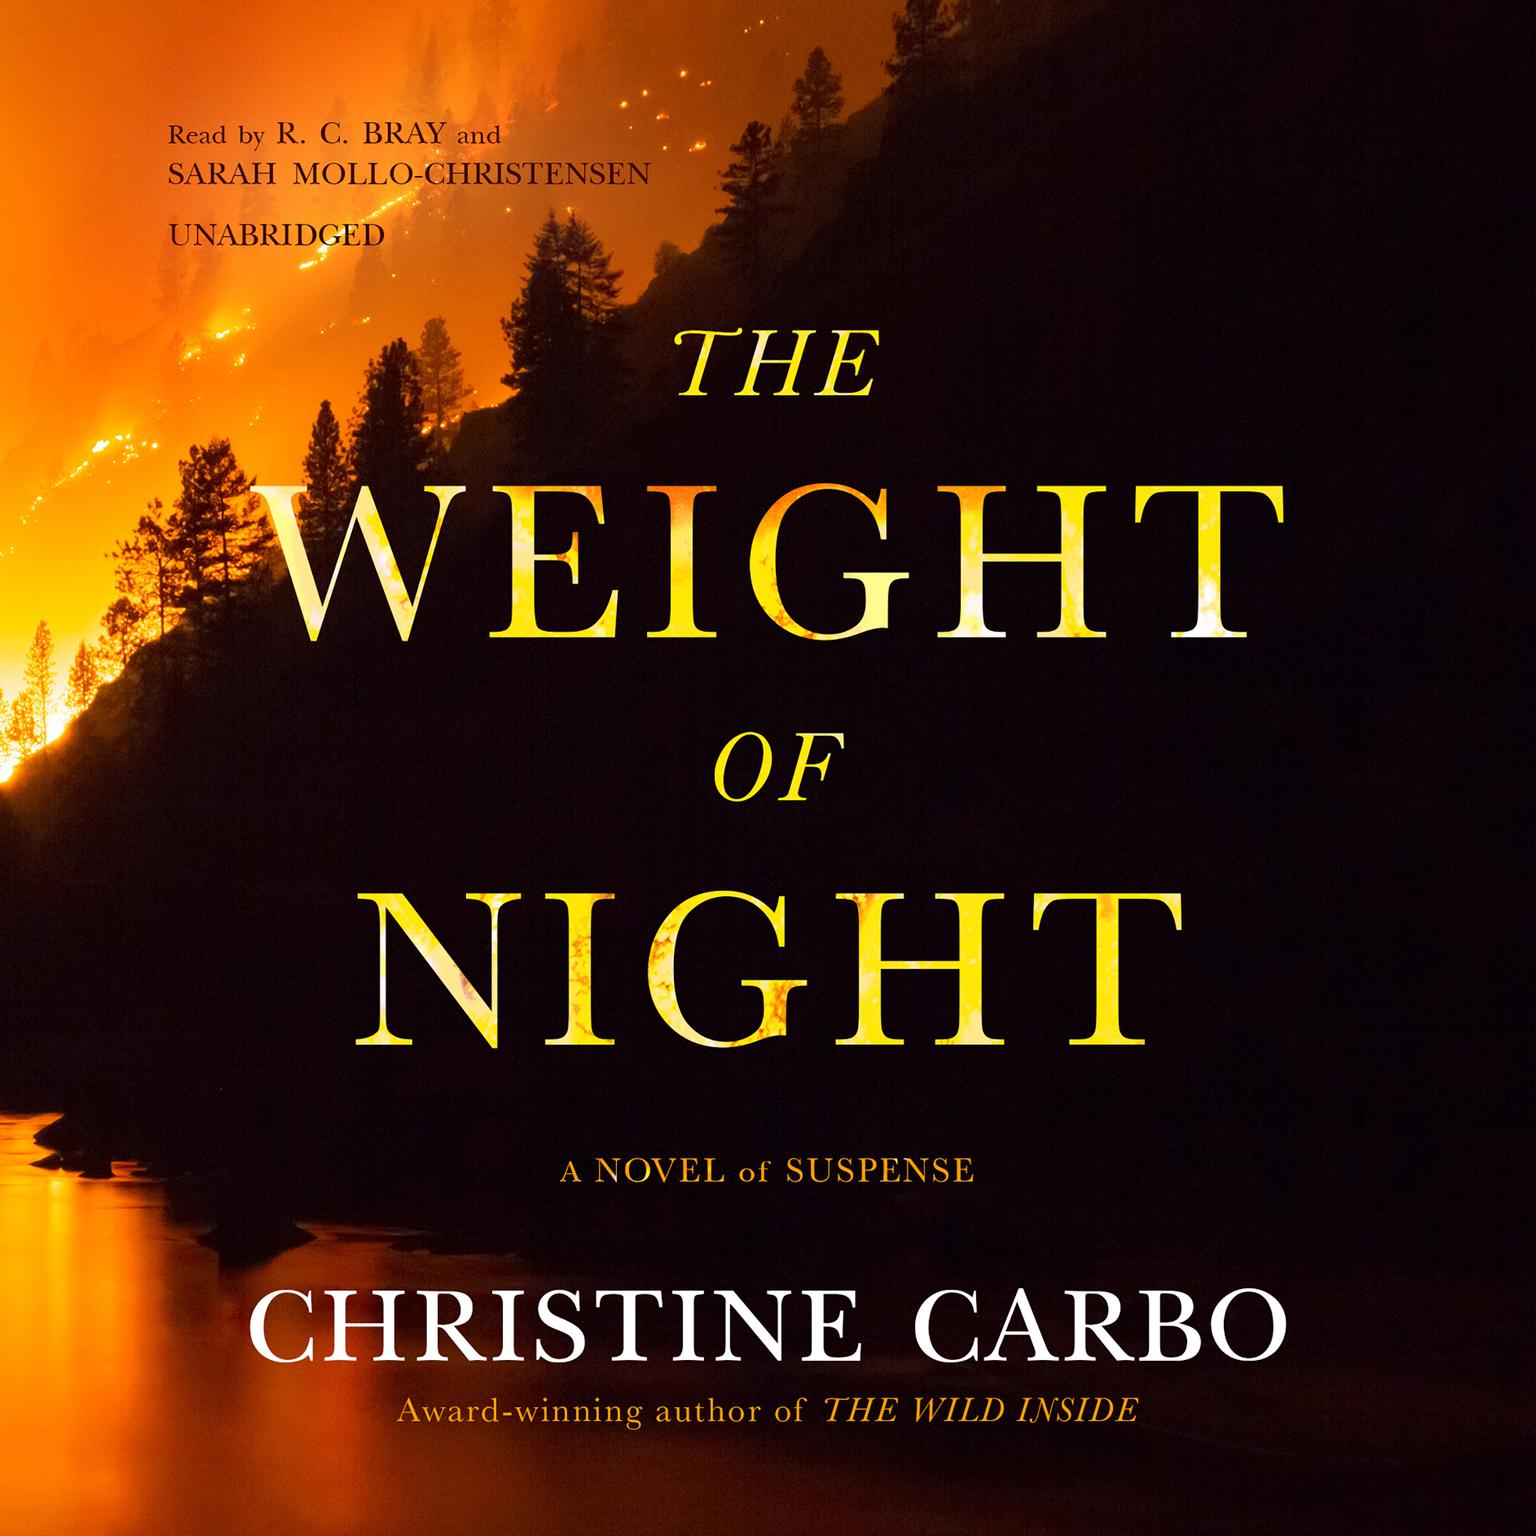 The Weight of Night: A Novel of Suspense Audiobook, by Christine Carbo